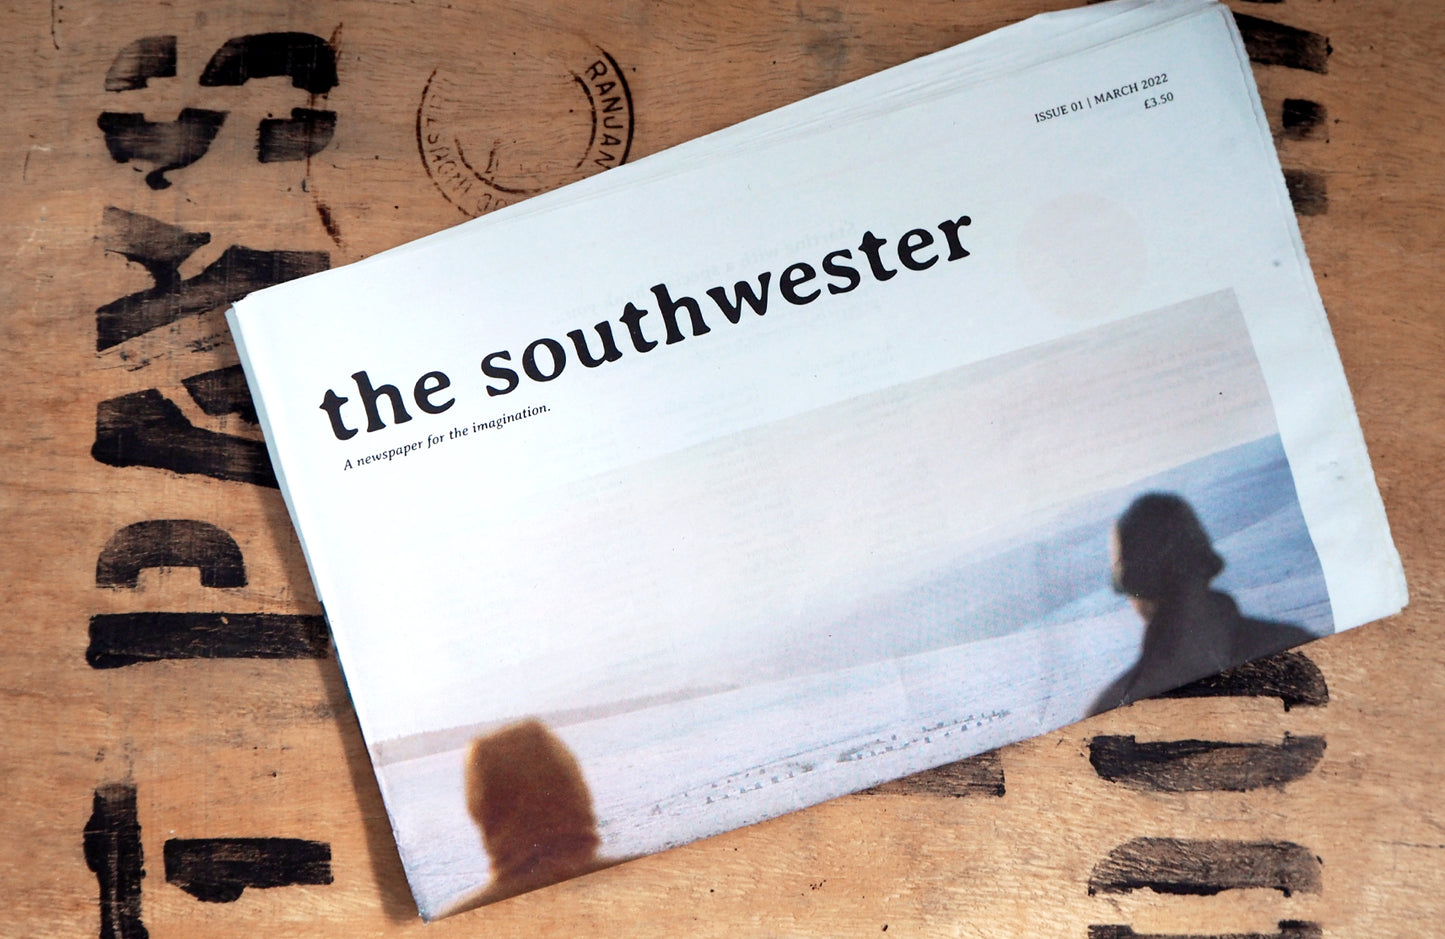 The Southwester